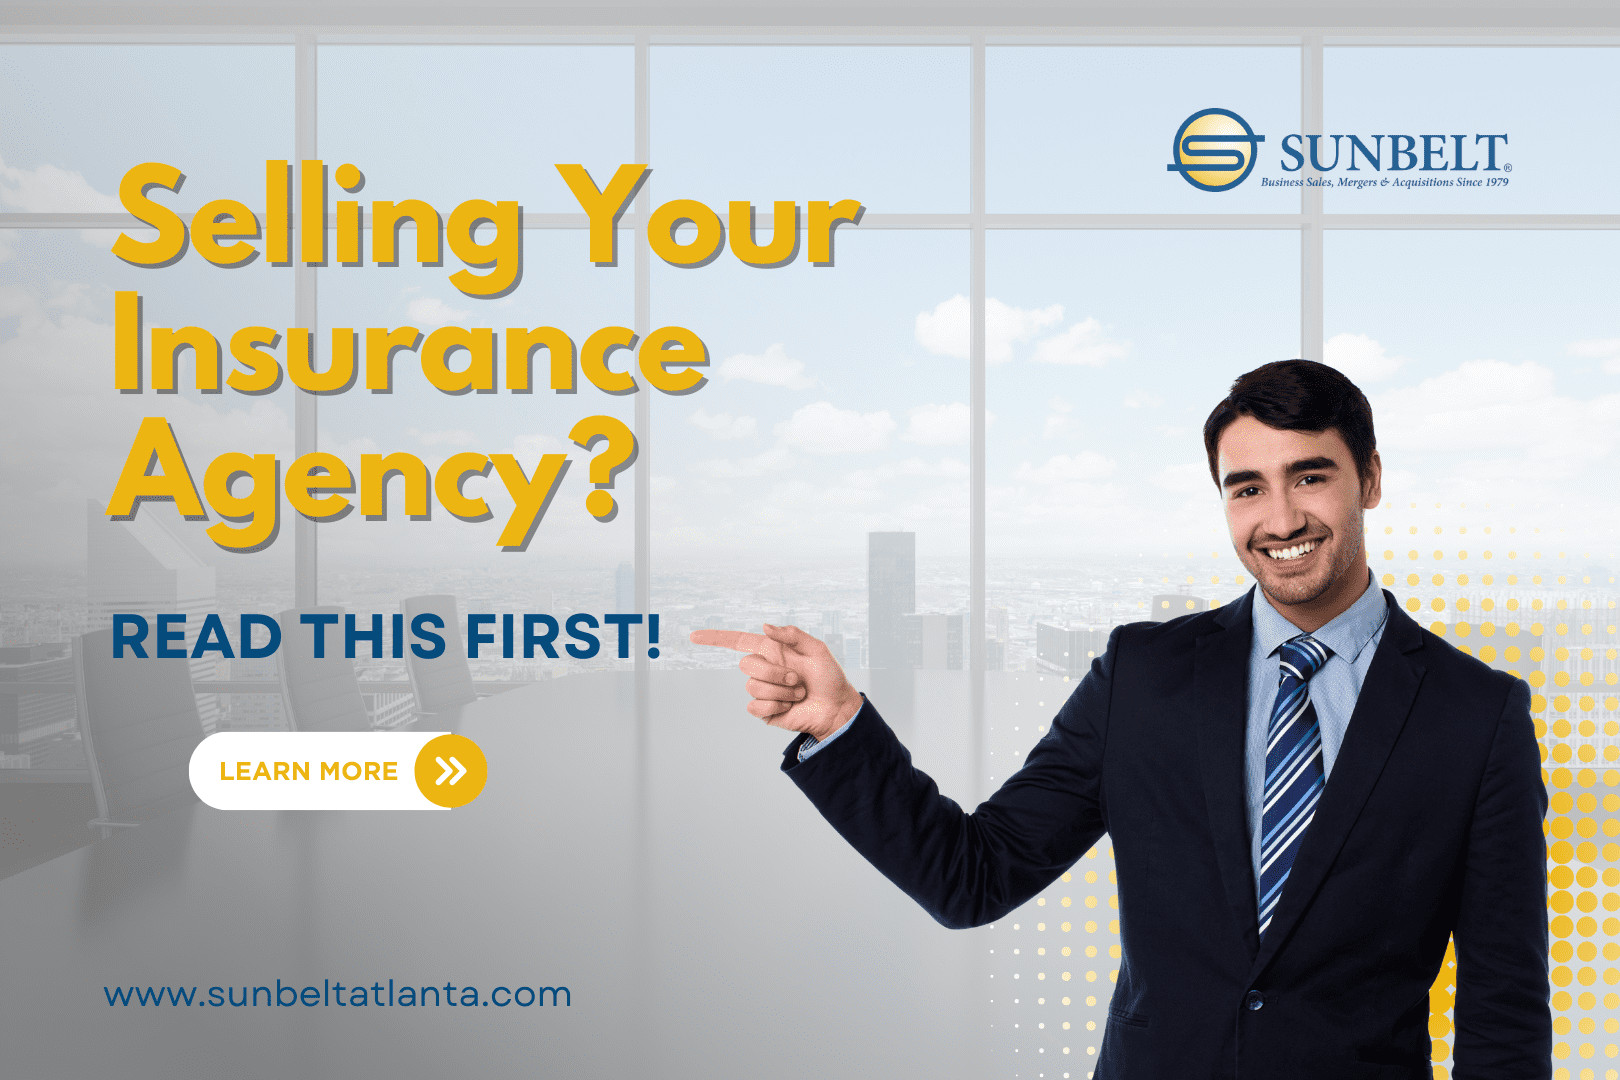 Considering Selling an Insurance Agency? Stop! And Read This First.